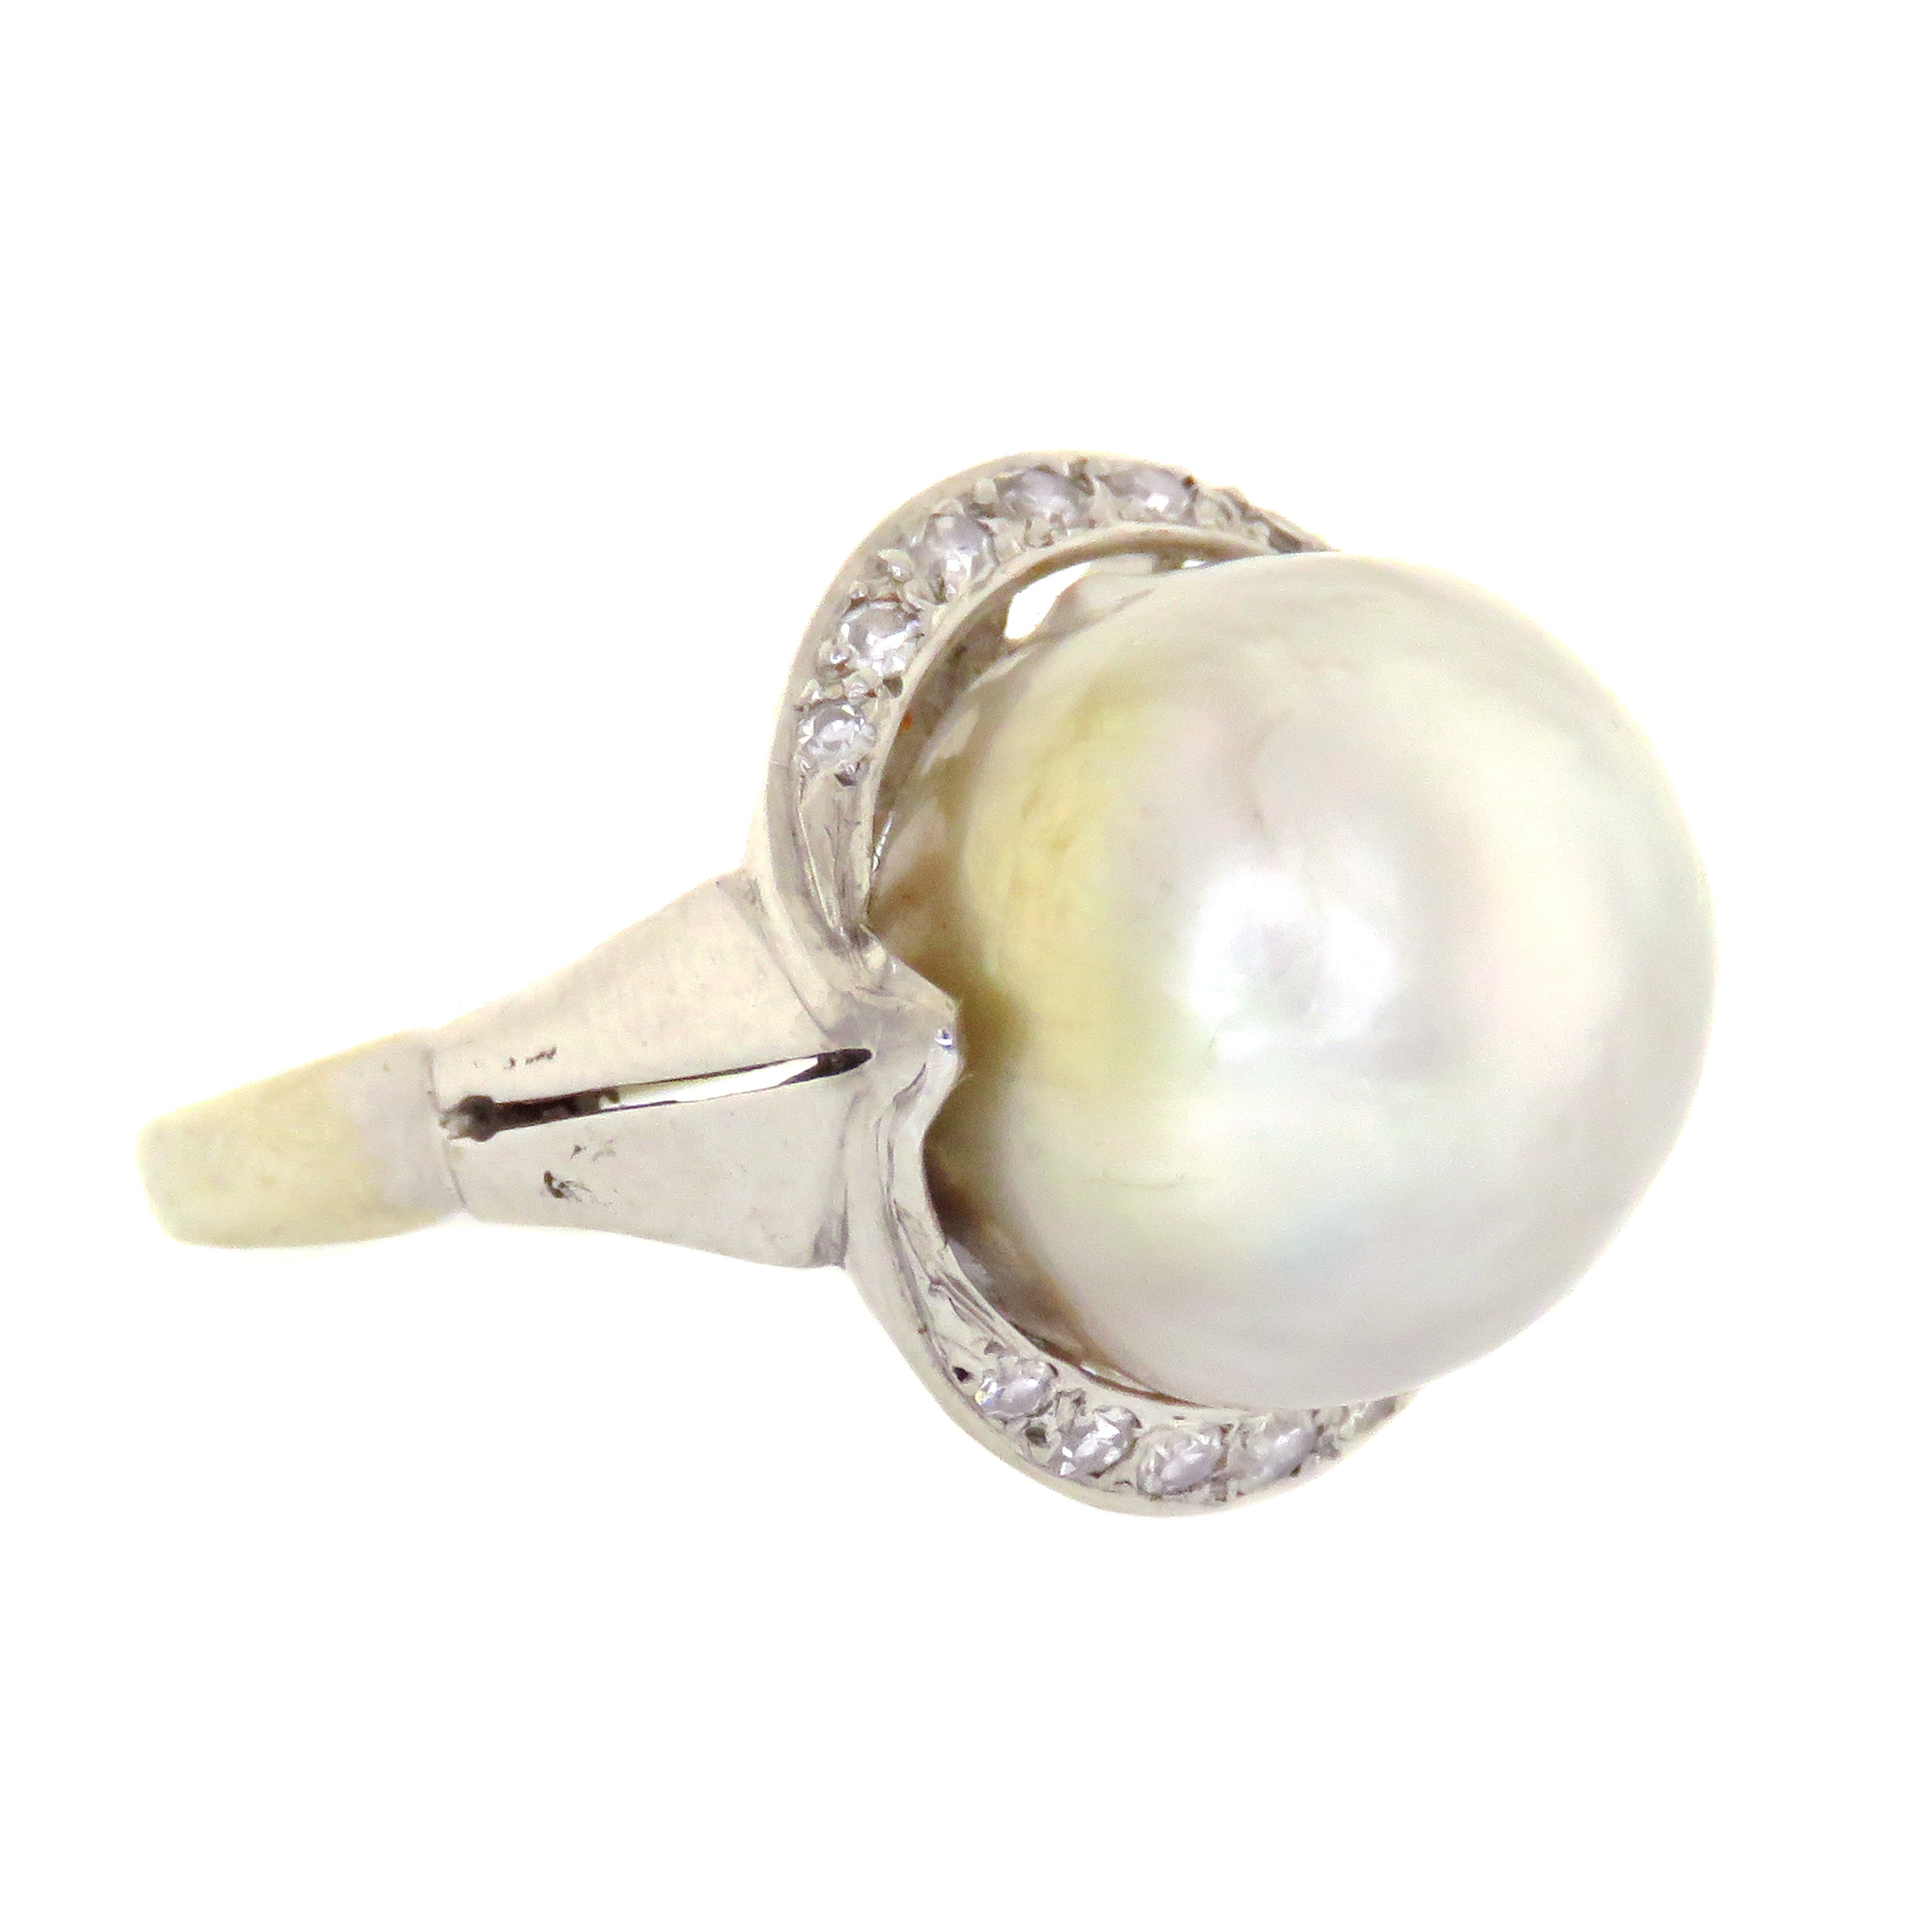 Hold for E⚡️18ct Saltwater Pearl Ring with GIA Report